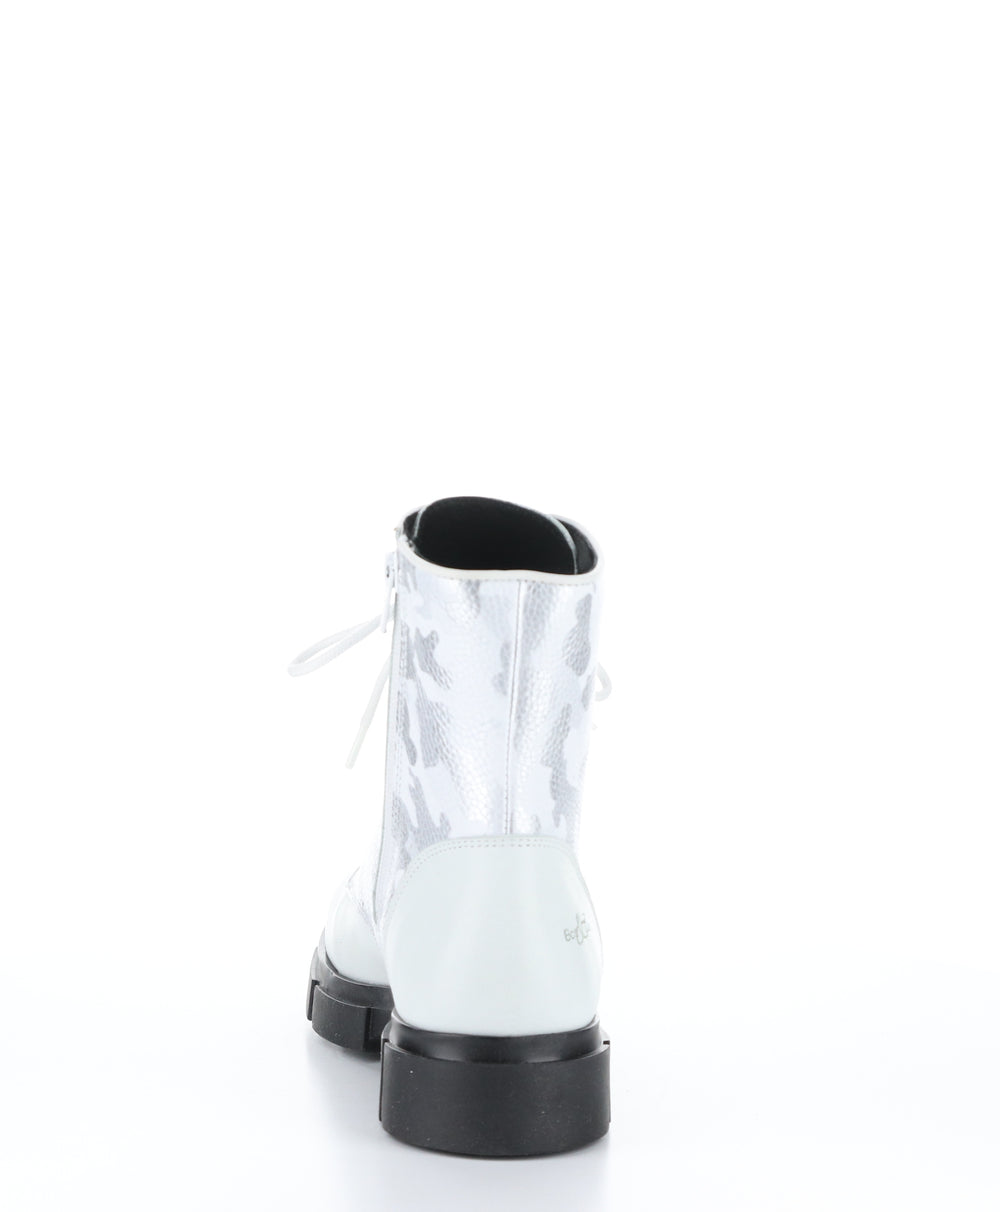 LUCK White/White/Silver Zip Up Boots